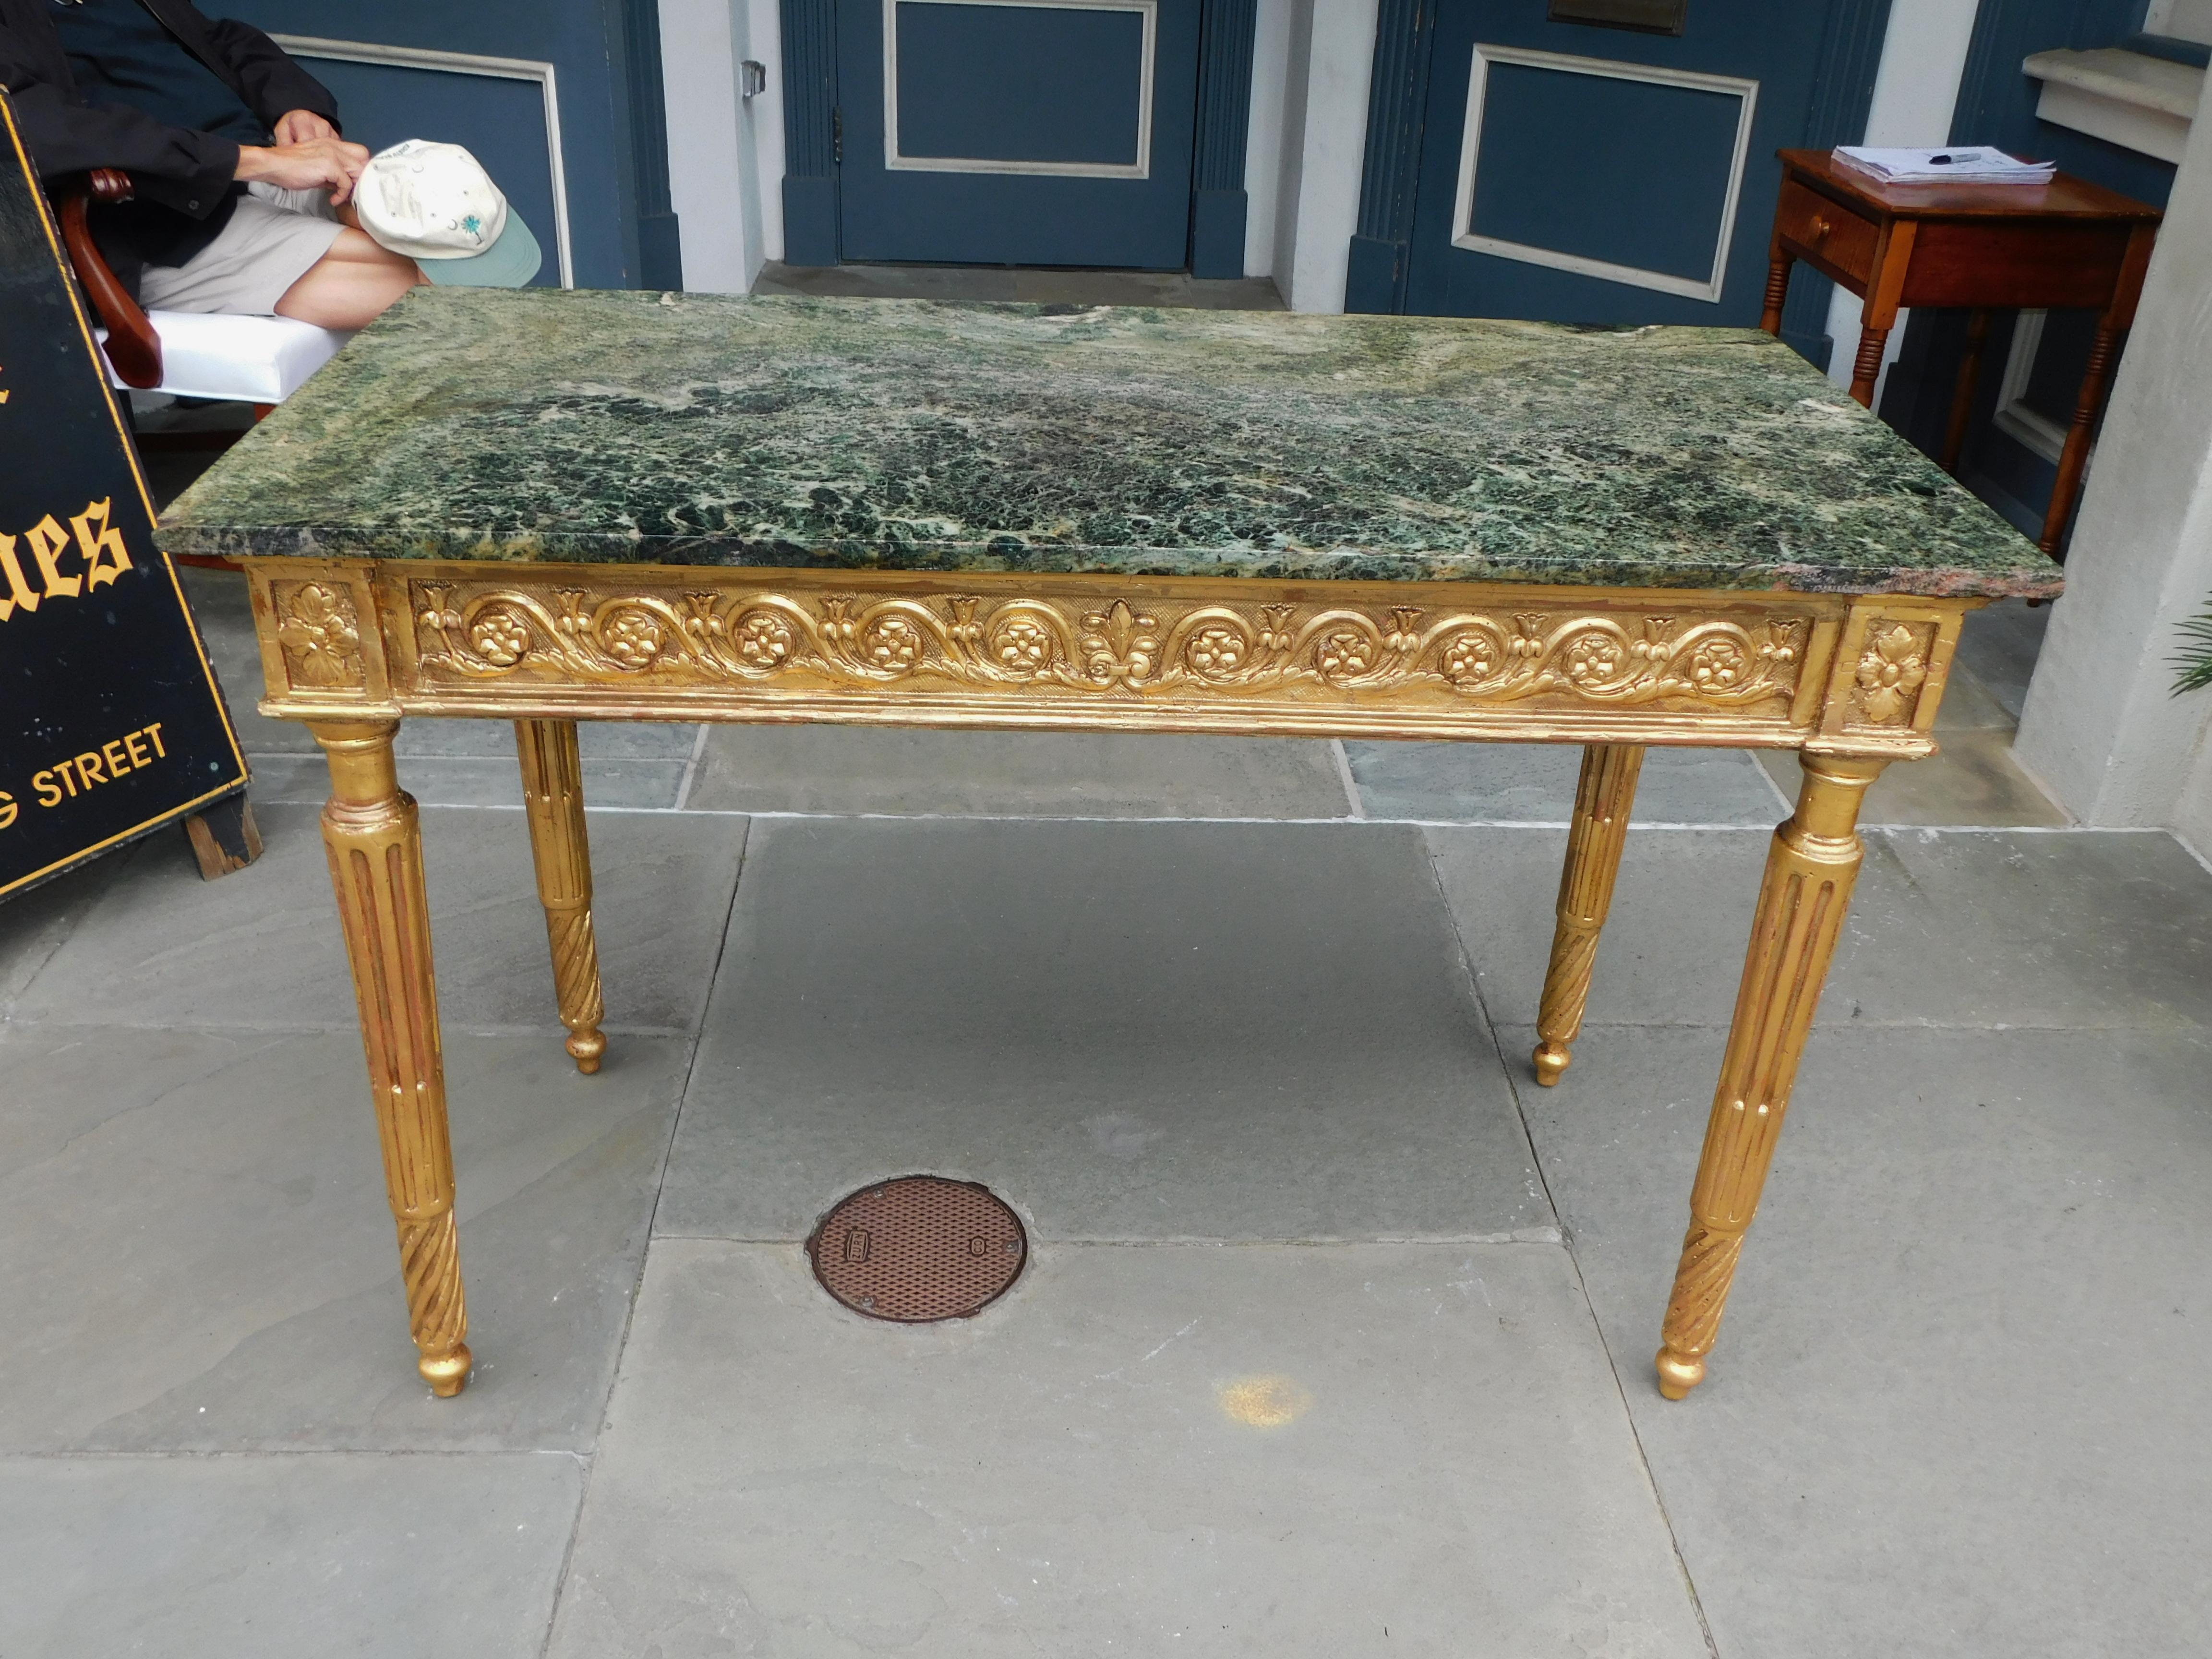 Italian gilt wood and gesso rectangular marble top console table with a articulated foliage medallion skirt, and resting on fluted spiral legs with ball feet. Console table retains the original marble. Late 18th Century.